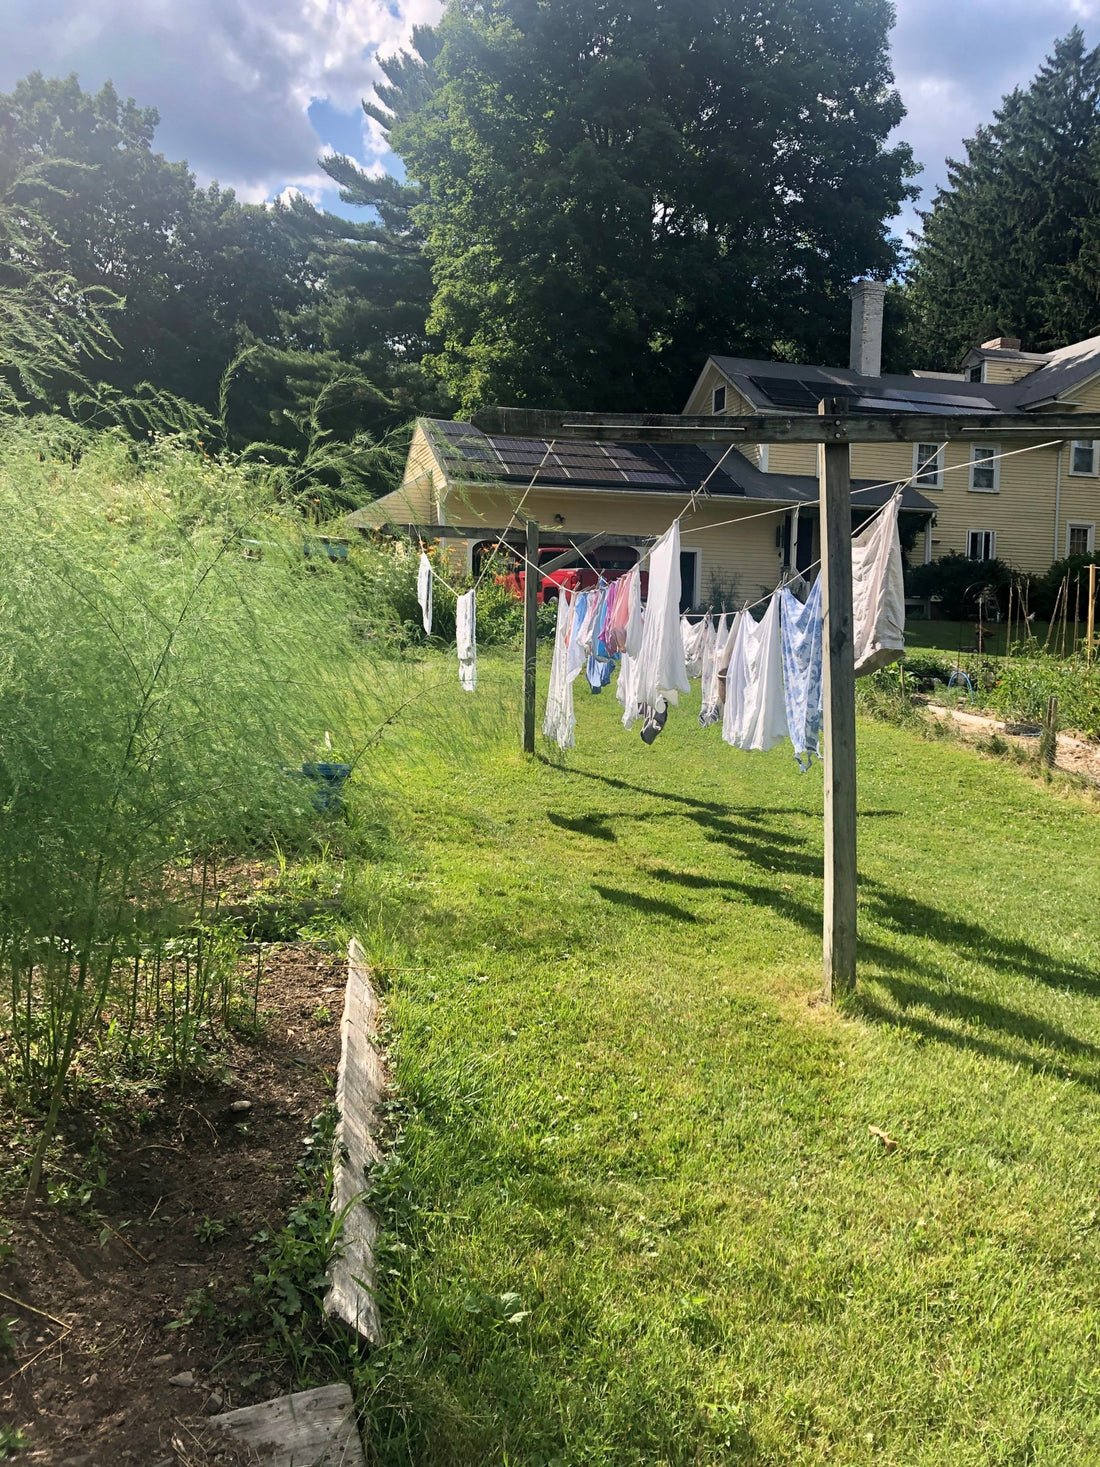 How to hang laundry out on the line